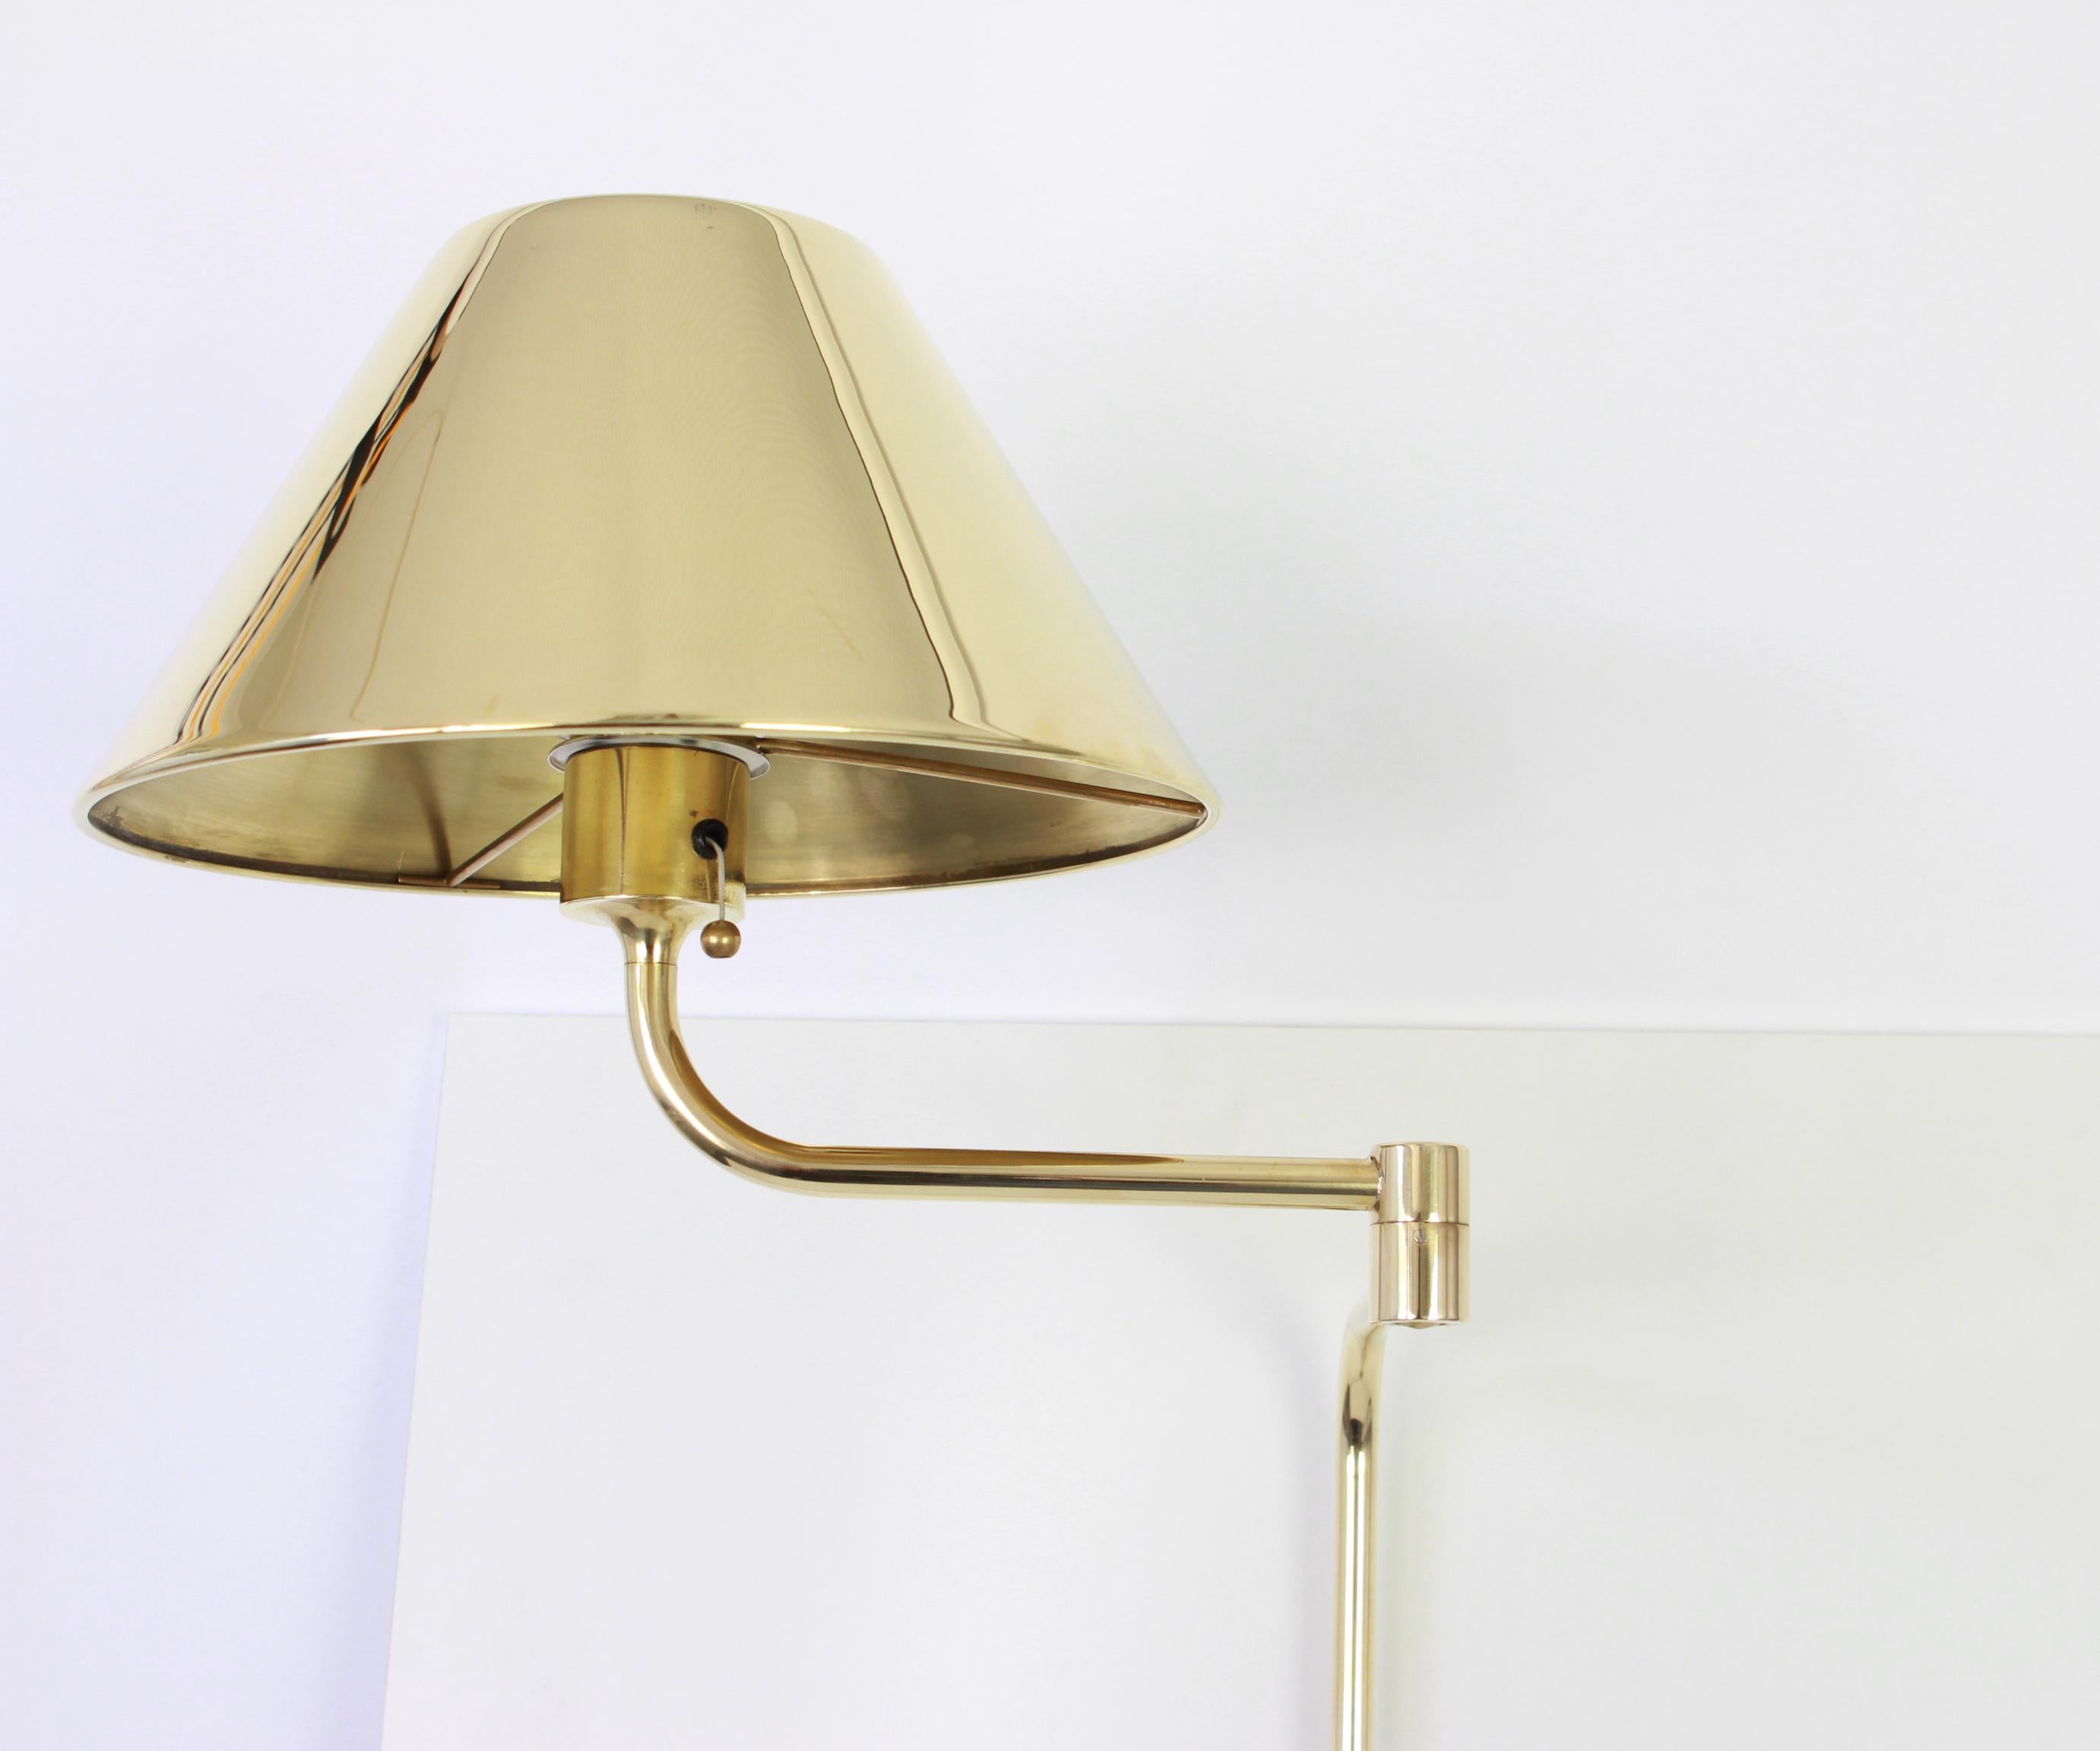 Midcentury designer brass wall sconces by Florian Schulz, 1980s
The wall light needs 1 x E27 standard bulb.
Light bulbs are not included. It is possible to install this fixture in all countries (US, UK, Europe, Asia,